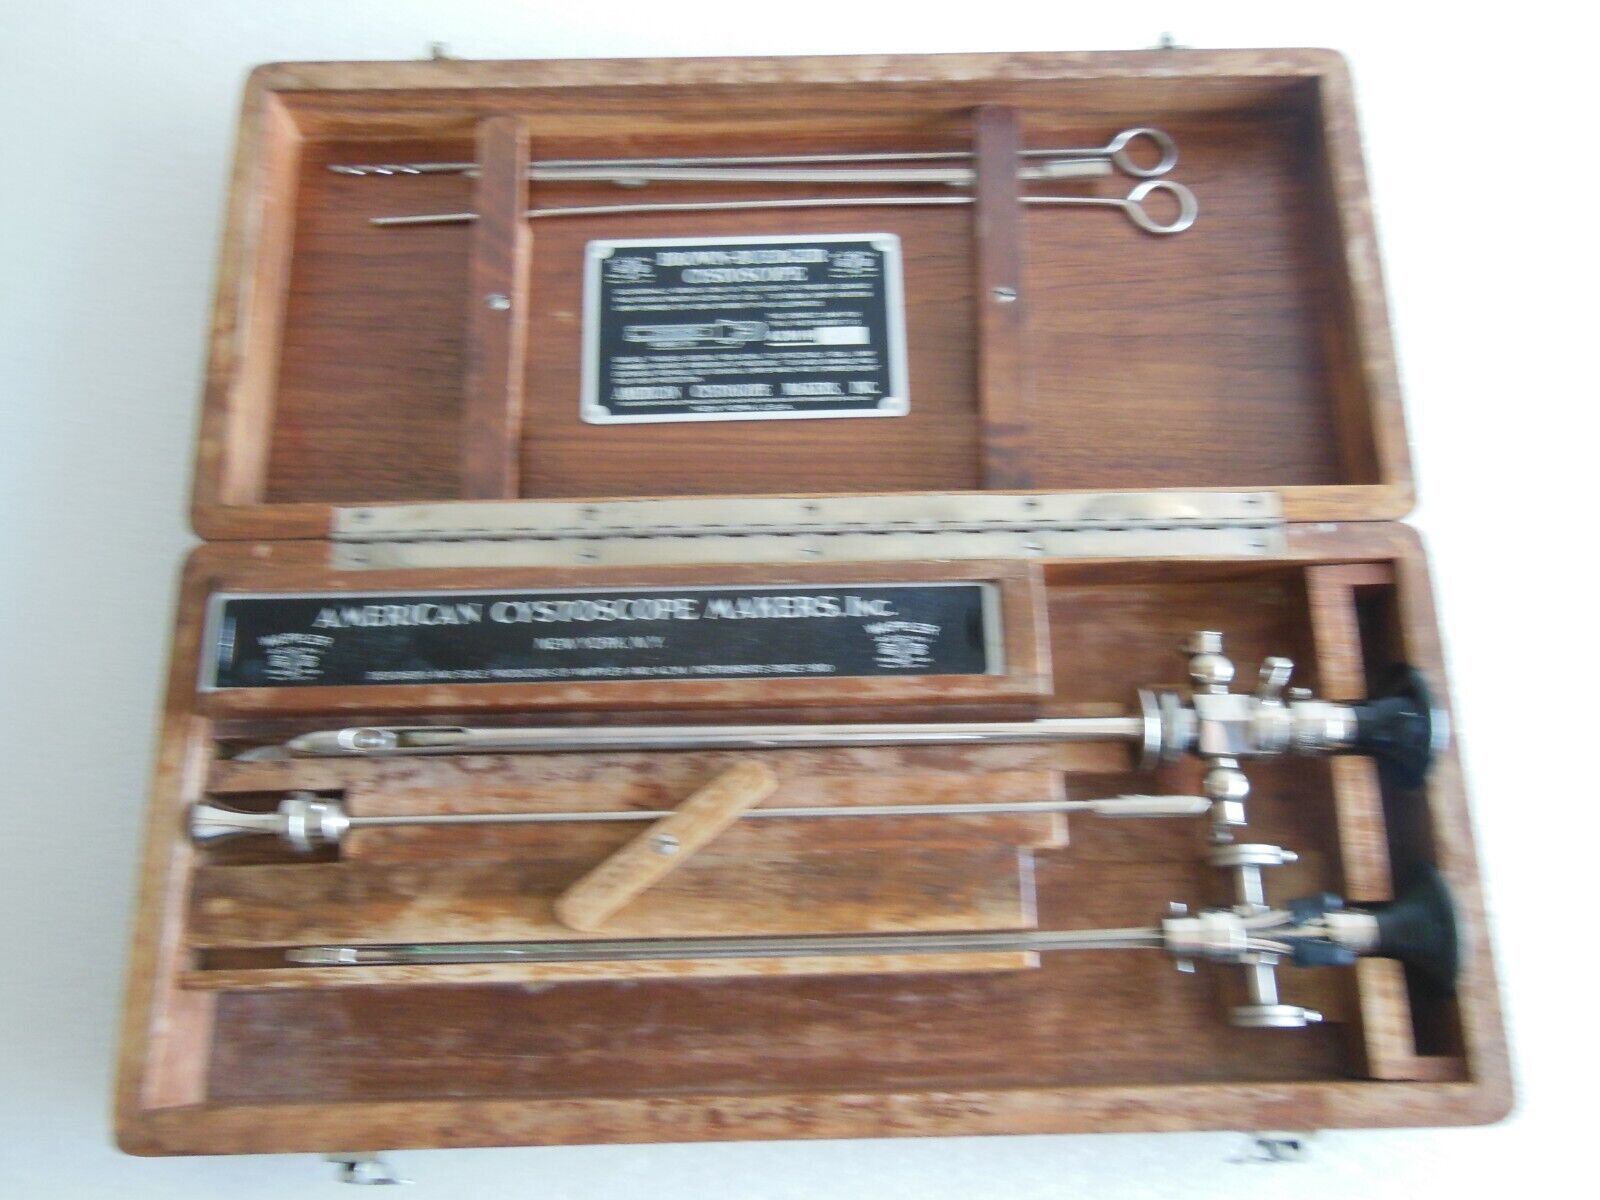 Vintage Antique American Cystoscope Makers Brown-Buerger 